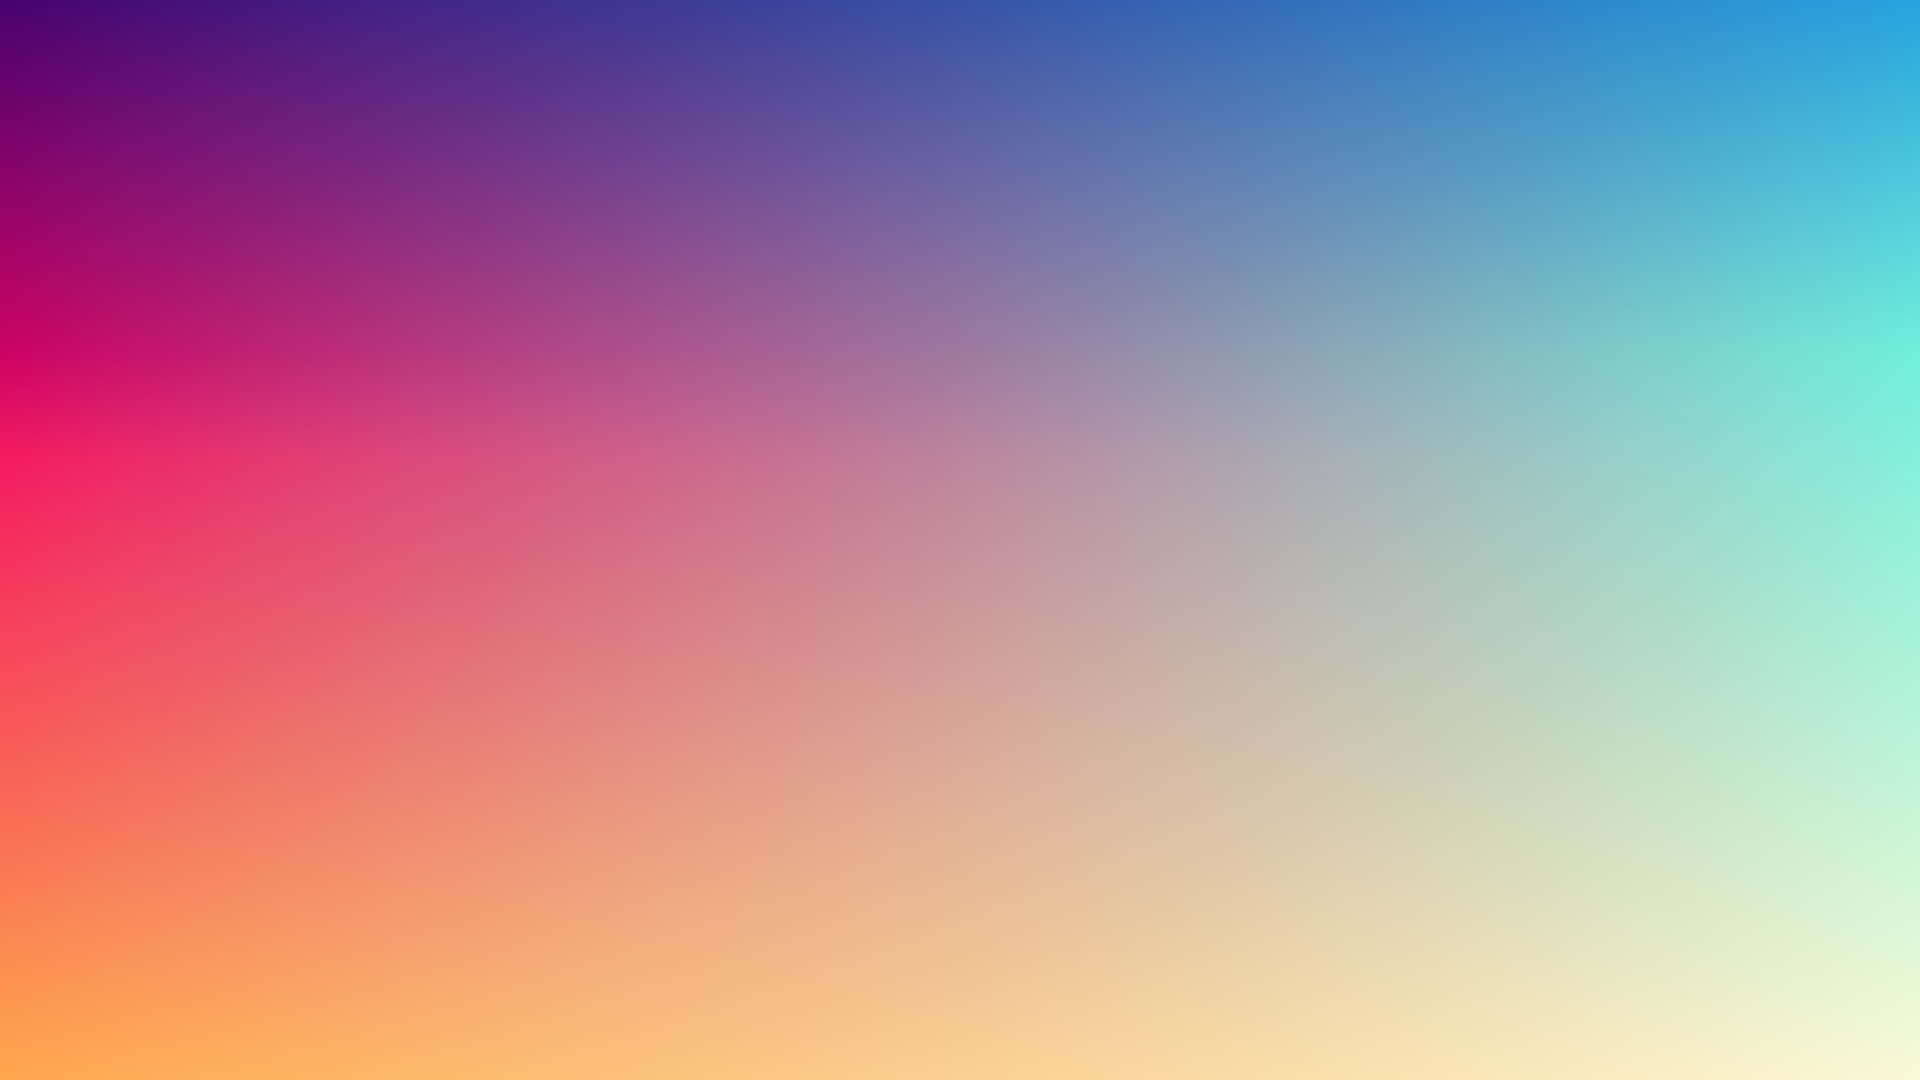 A vibrant rainbow gradient fills the background